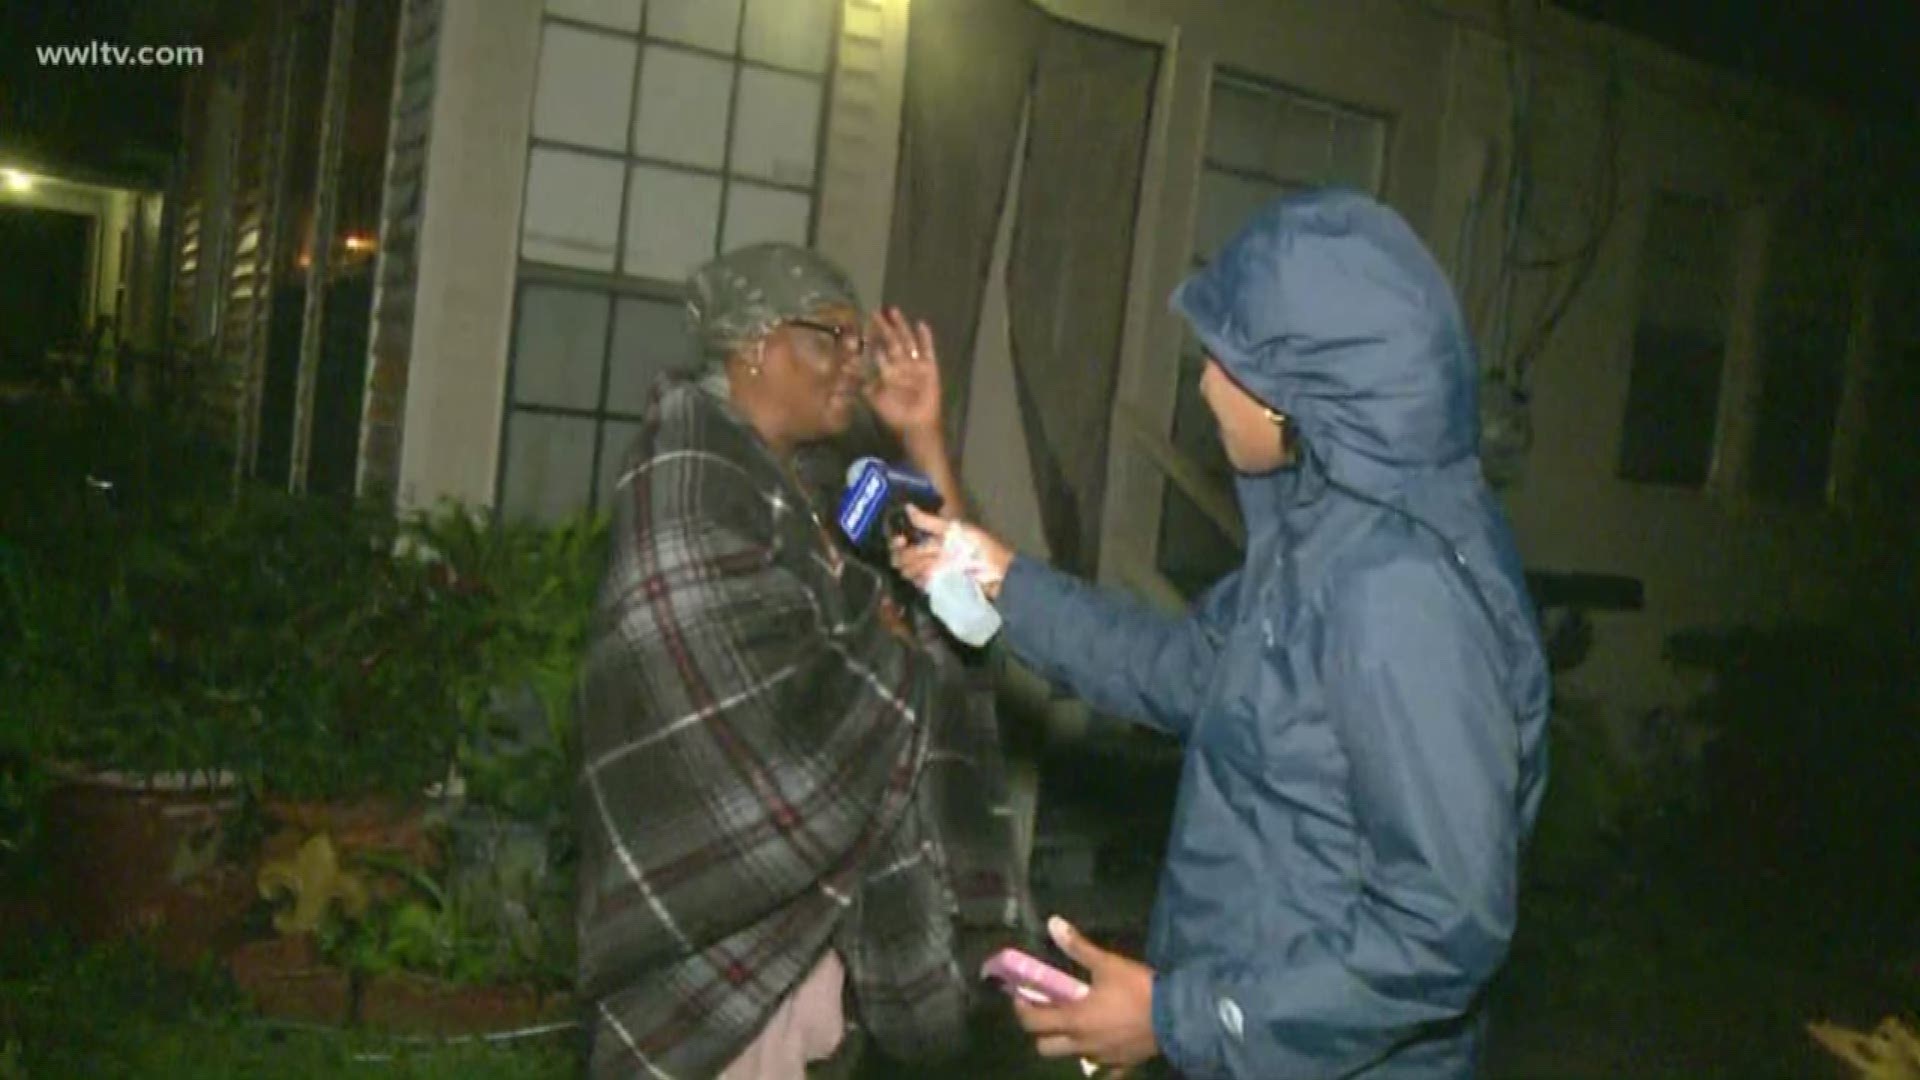 Nearly 10,000 people in Terrebonne Parish are without power as Tropical Storm Barry is hours away from landfall. WWL-TV reporter Meghan Kee reports from Houma, Louisiana.